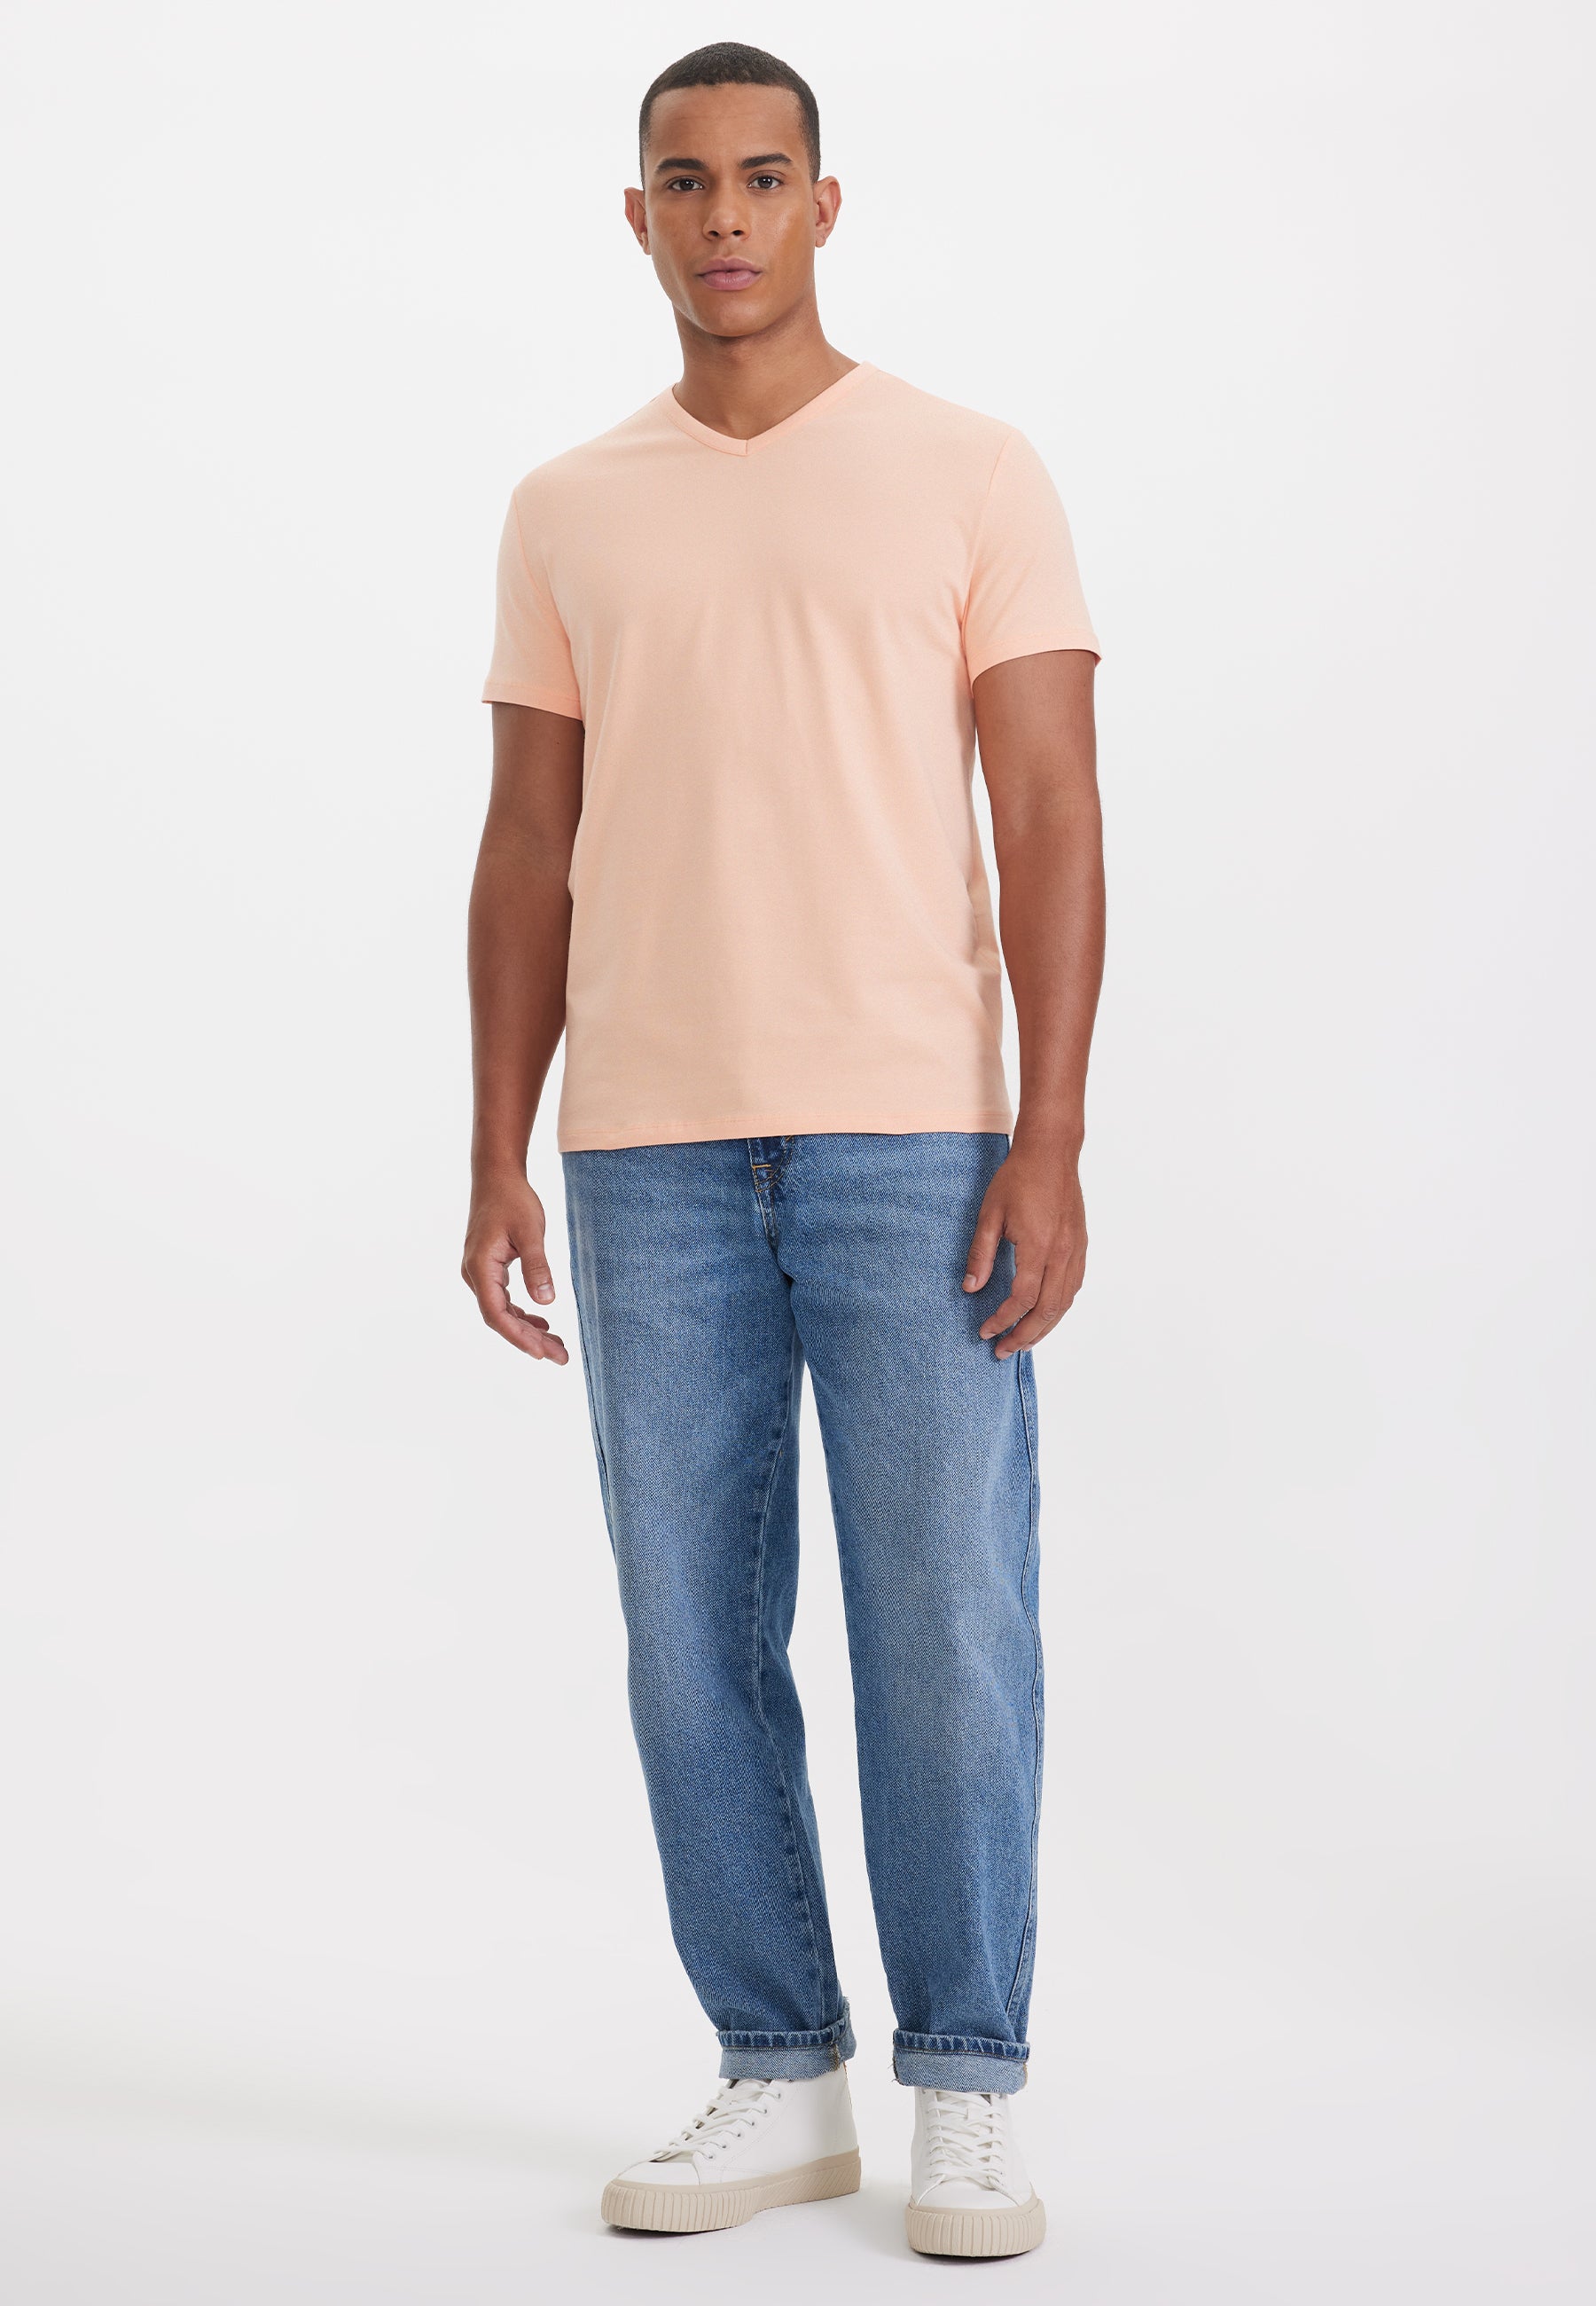 THEO V-NECK TEE in Coral